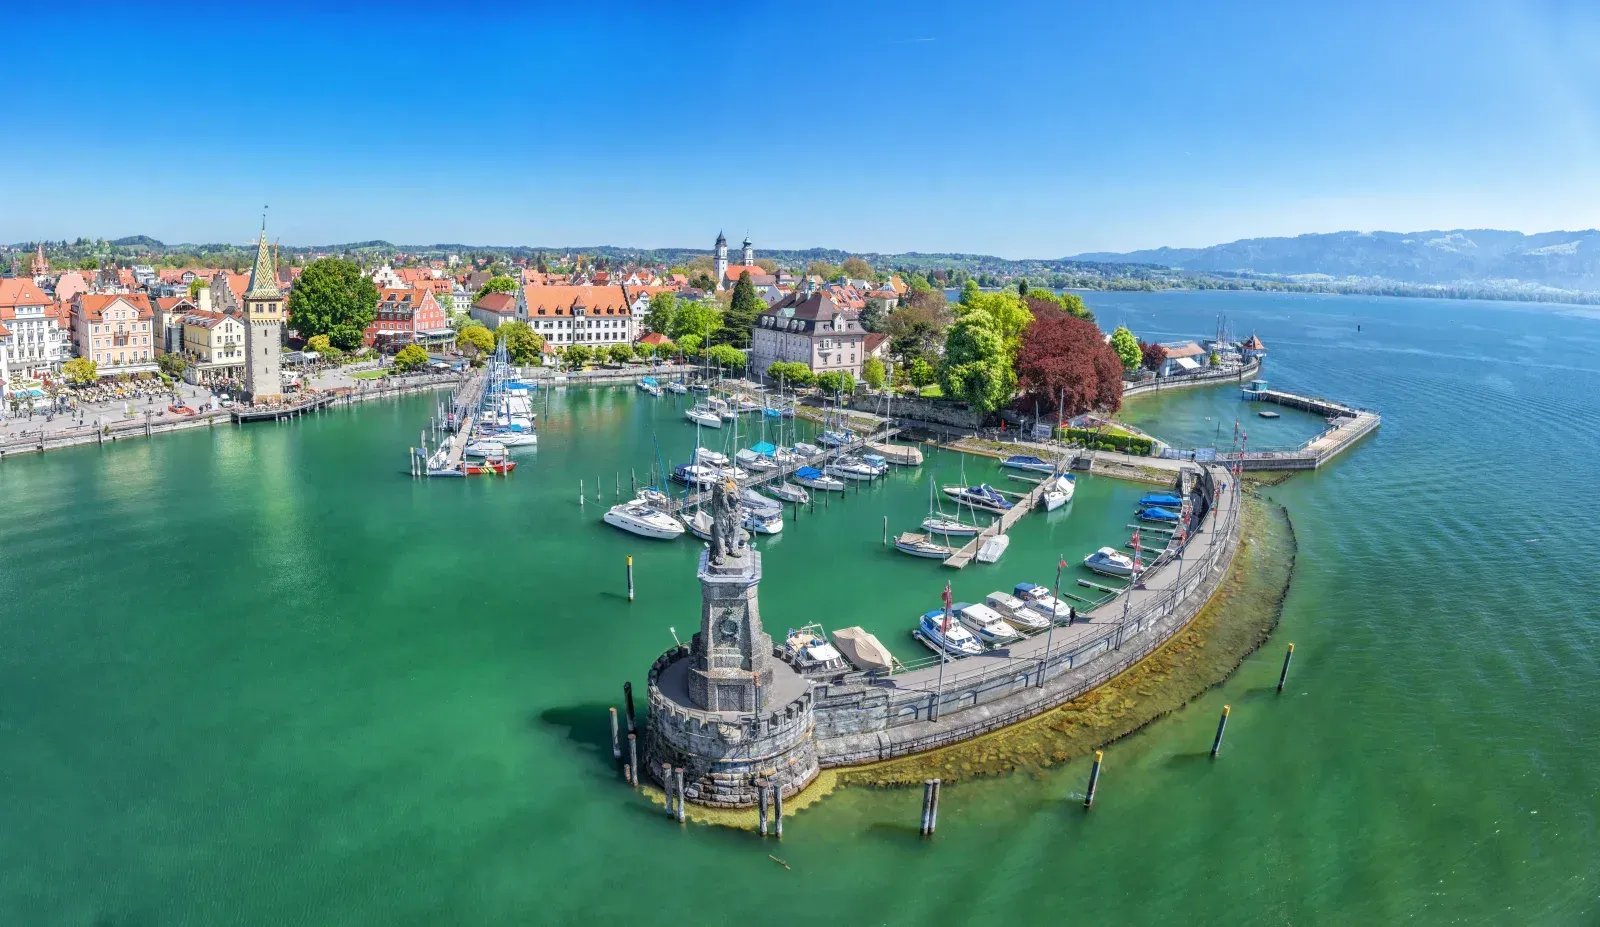 Bodensee (Lake Constance) - Top 13 Cities and Attractions